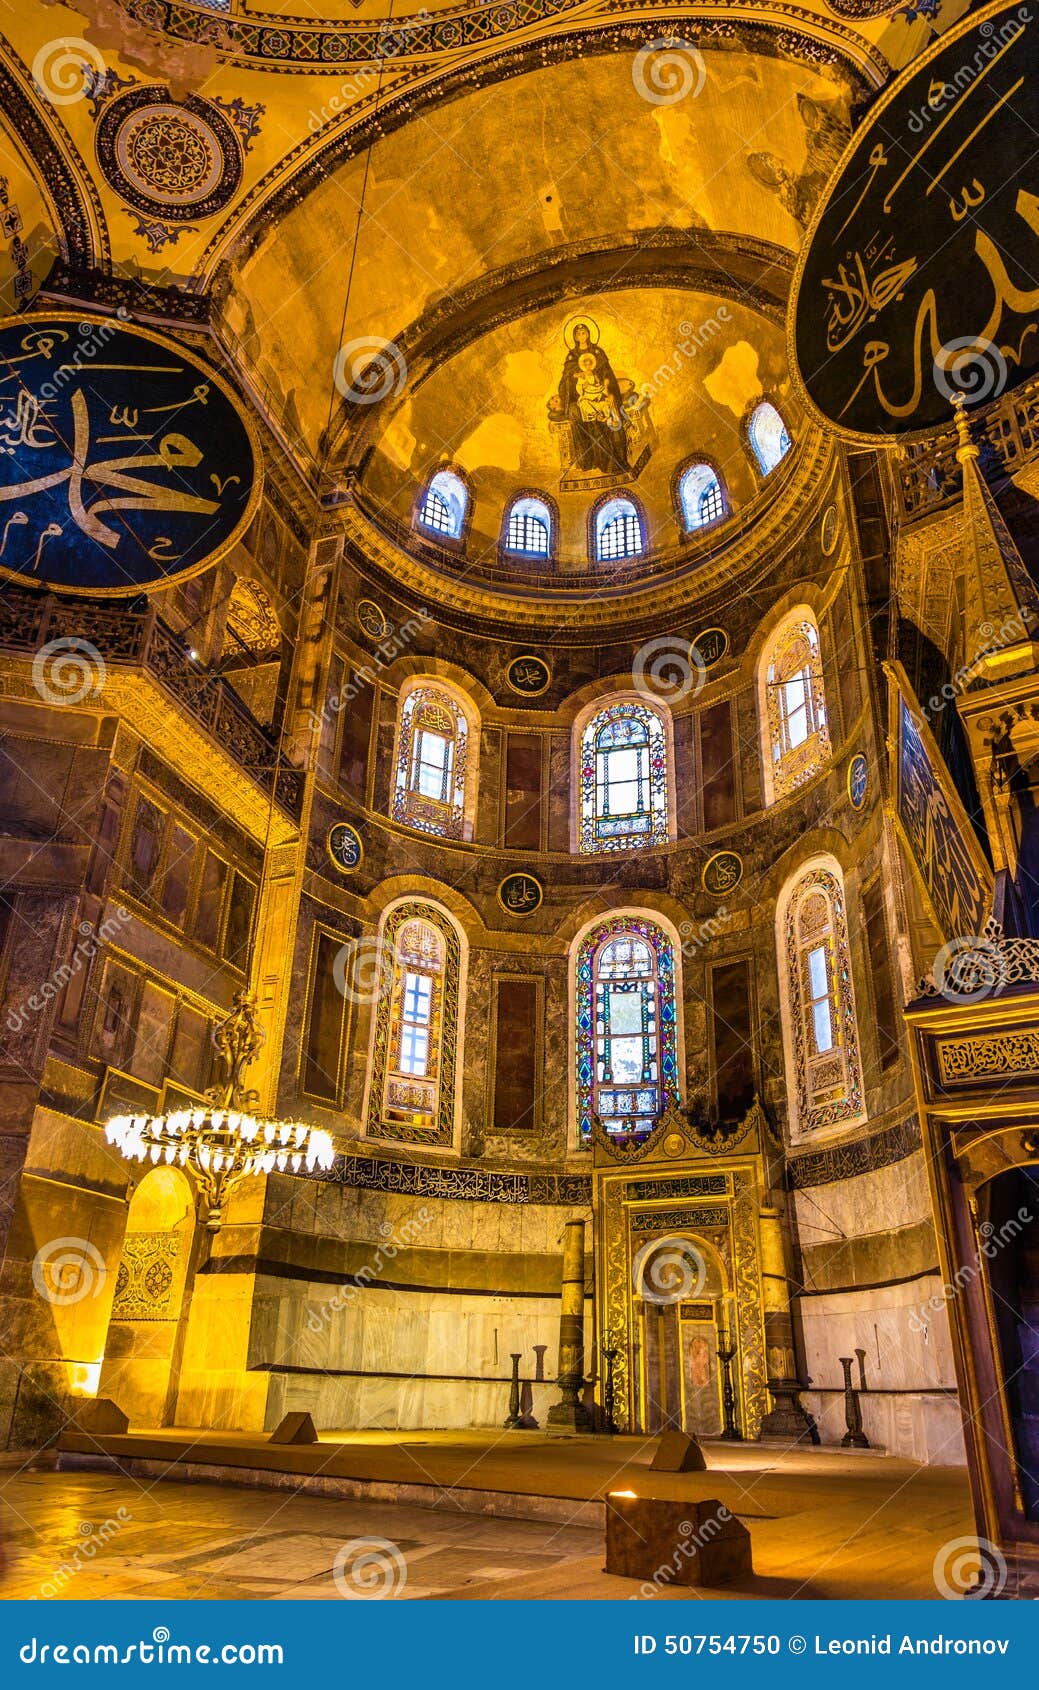 Apse Mosaic of the Theotokos (Virgin Mother and Child) in Hagia Sophia